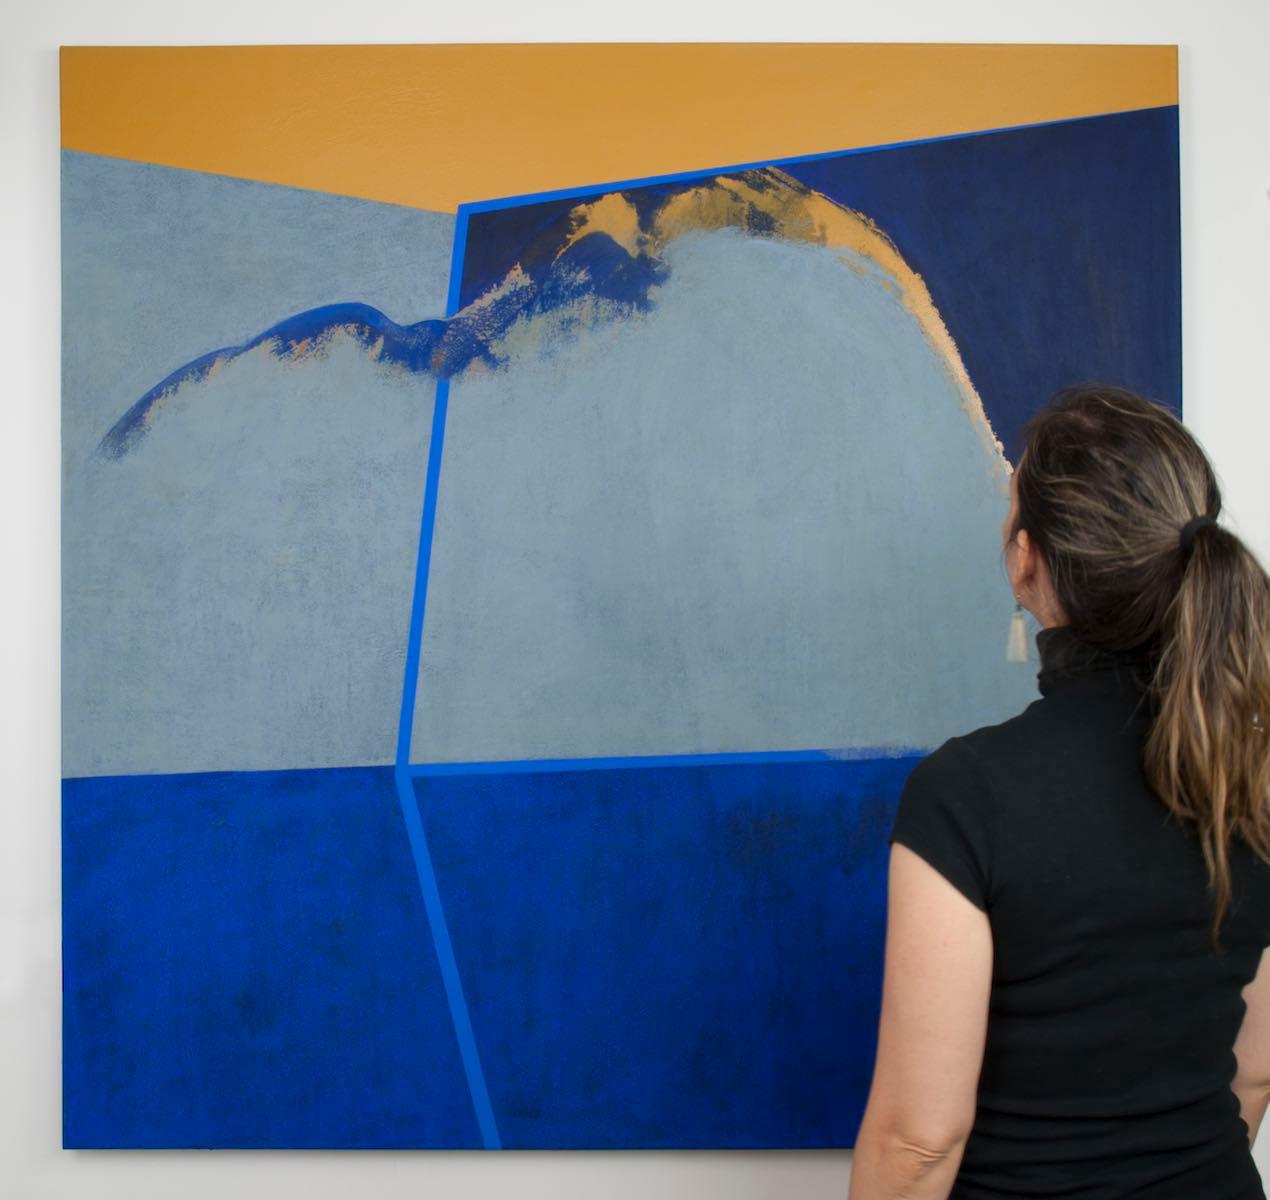 blue painting sold for millions